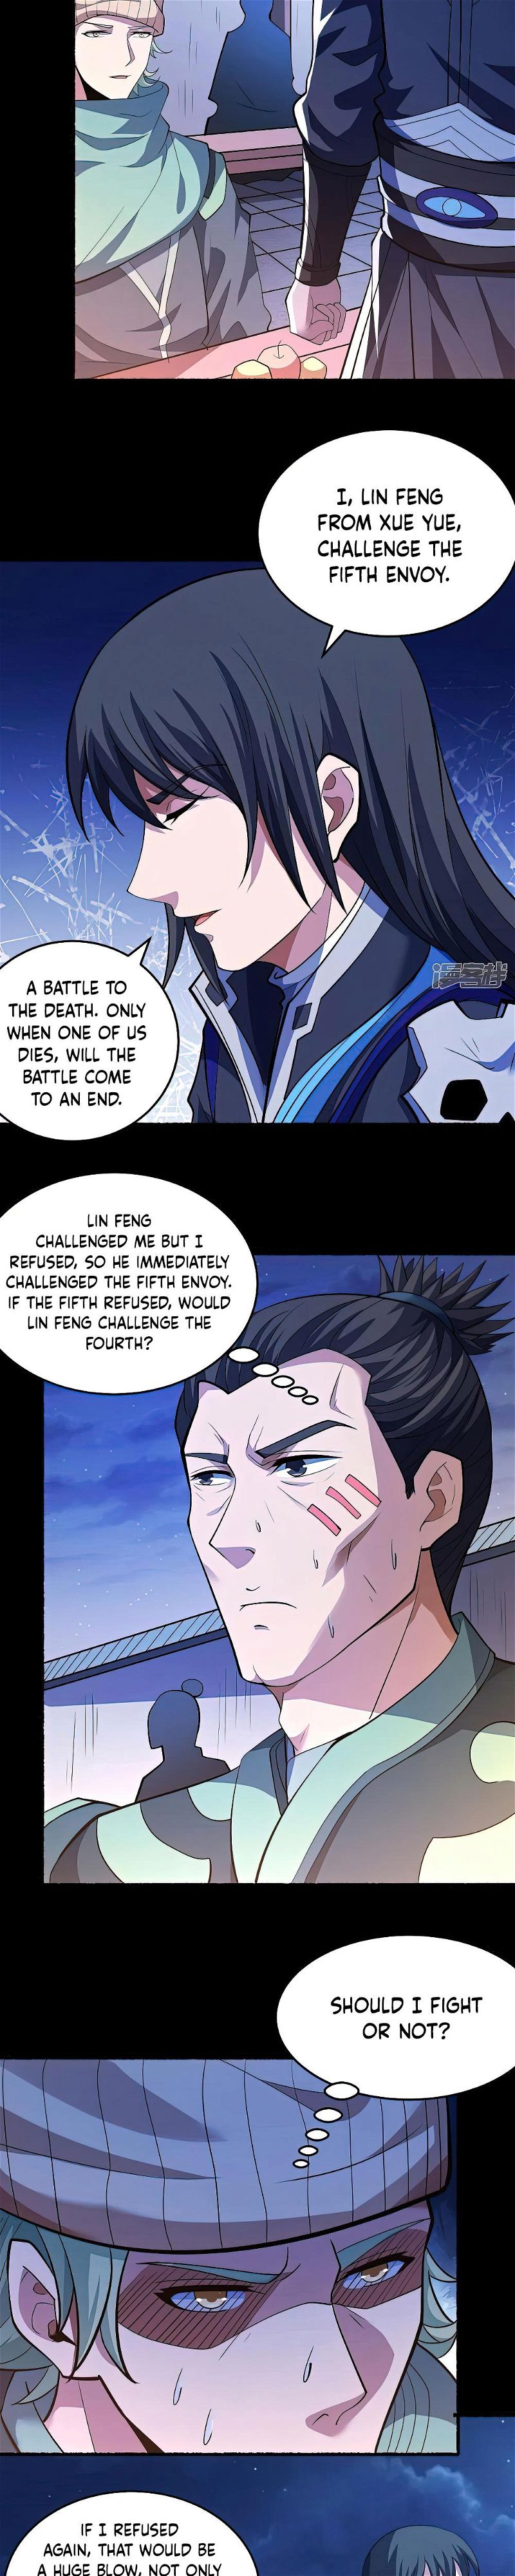 God of Martial Arts Chapter 610 page 8